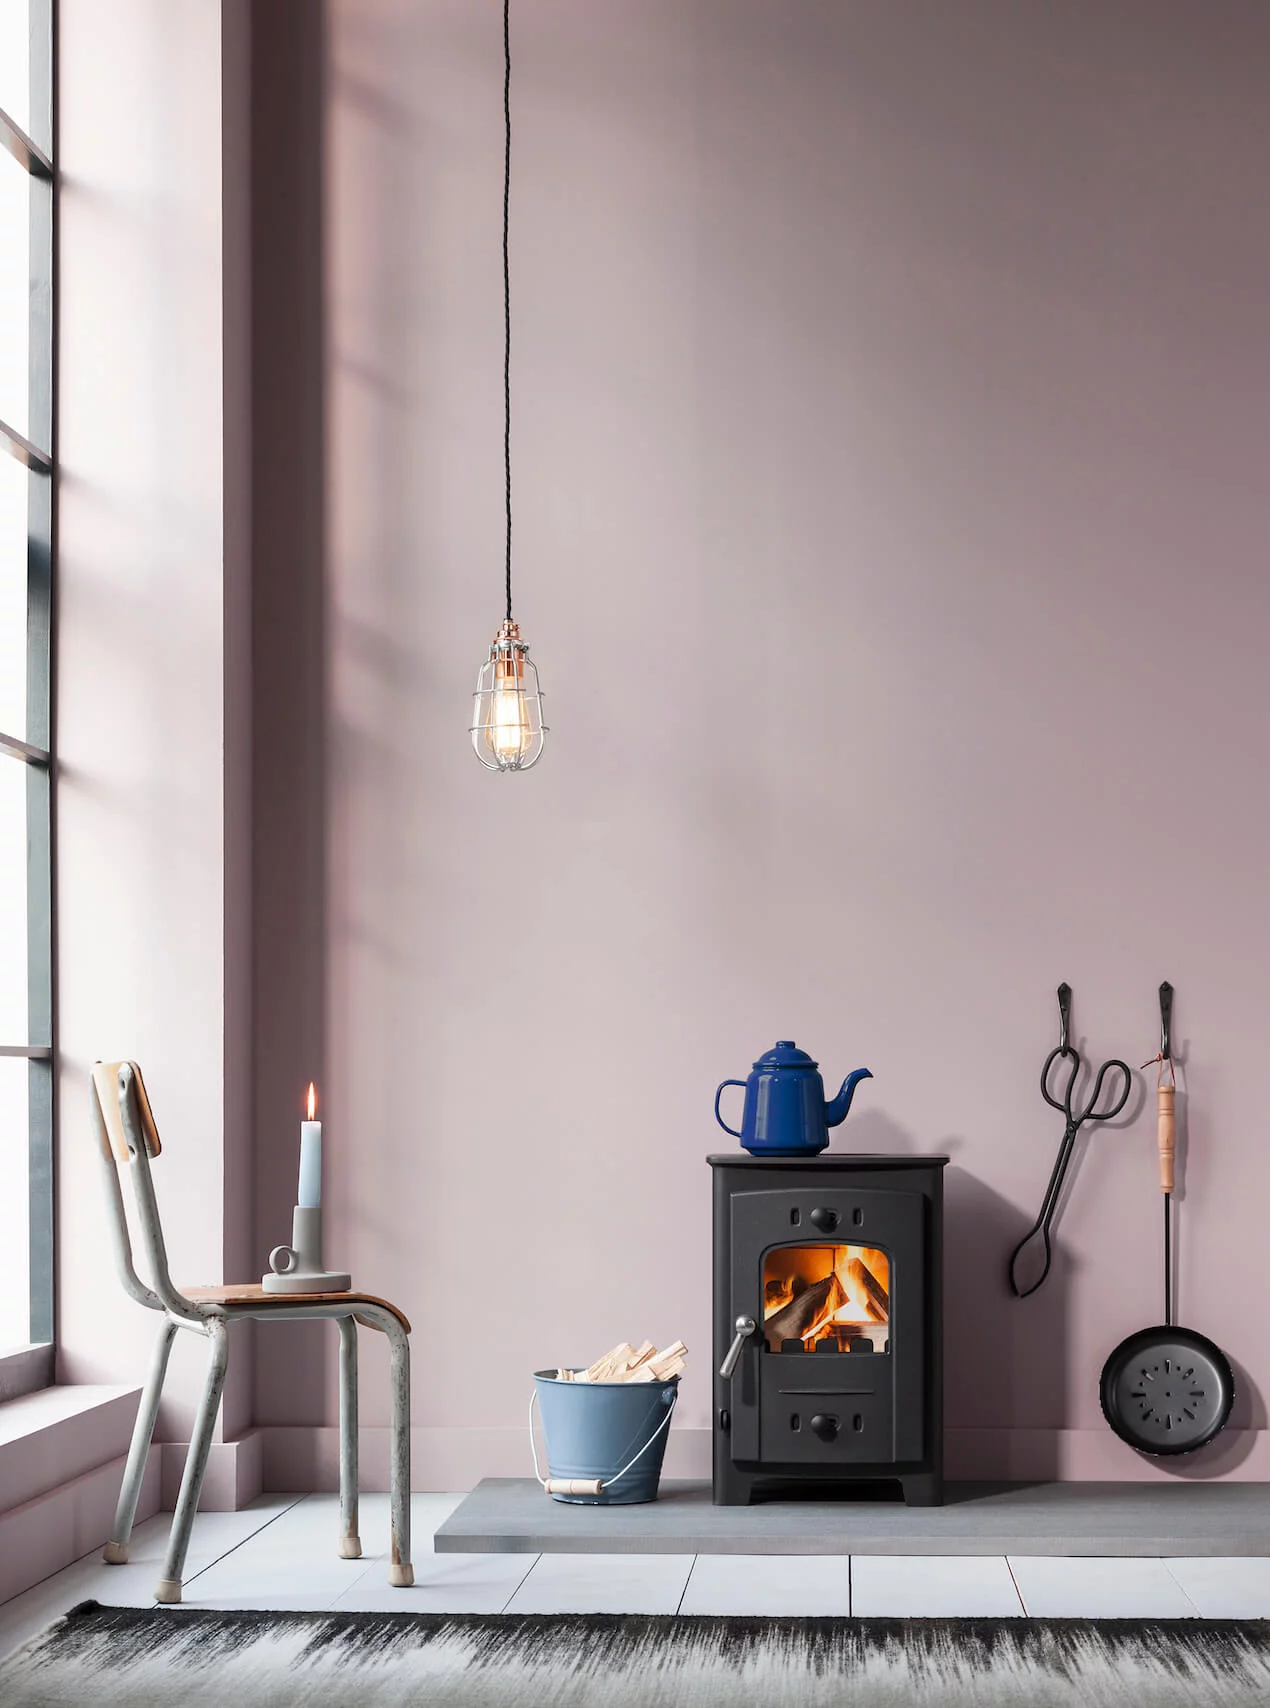 Replacing your wood burner? Make sure it's an Ecodesign ready stove -  Goodhomes Magazine : Goodhomes Magazine